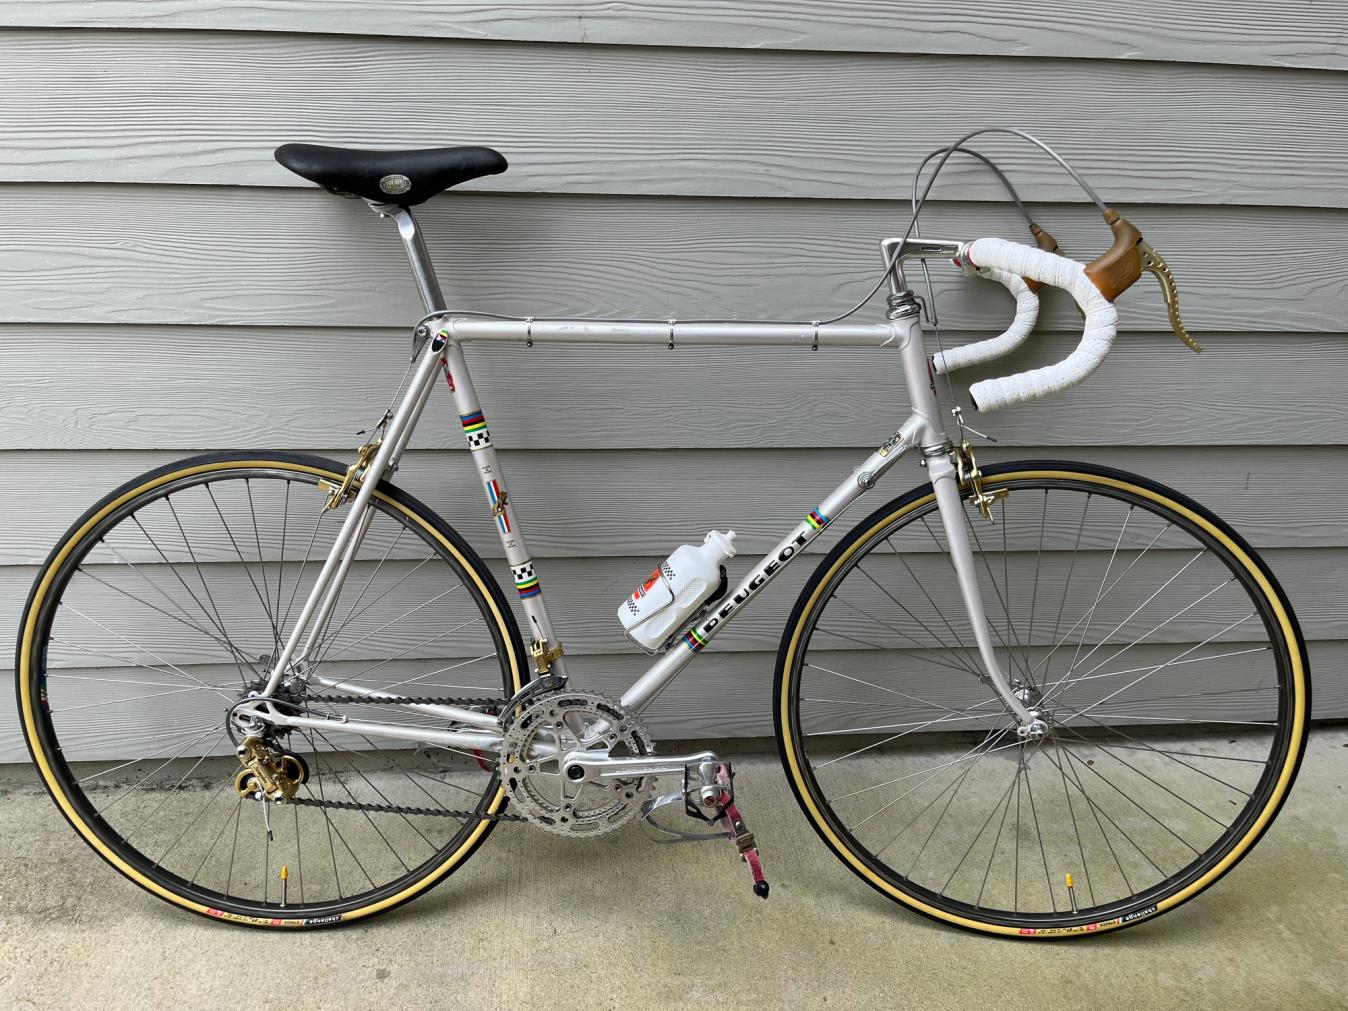 This retro Peugeot PY10 is from 1978 when the great Eddy Merckx was still racing, which is enough alone for a super nice vote